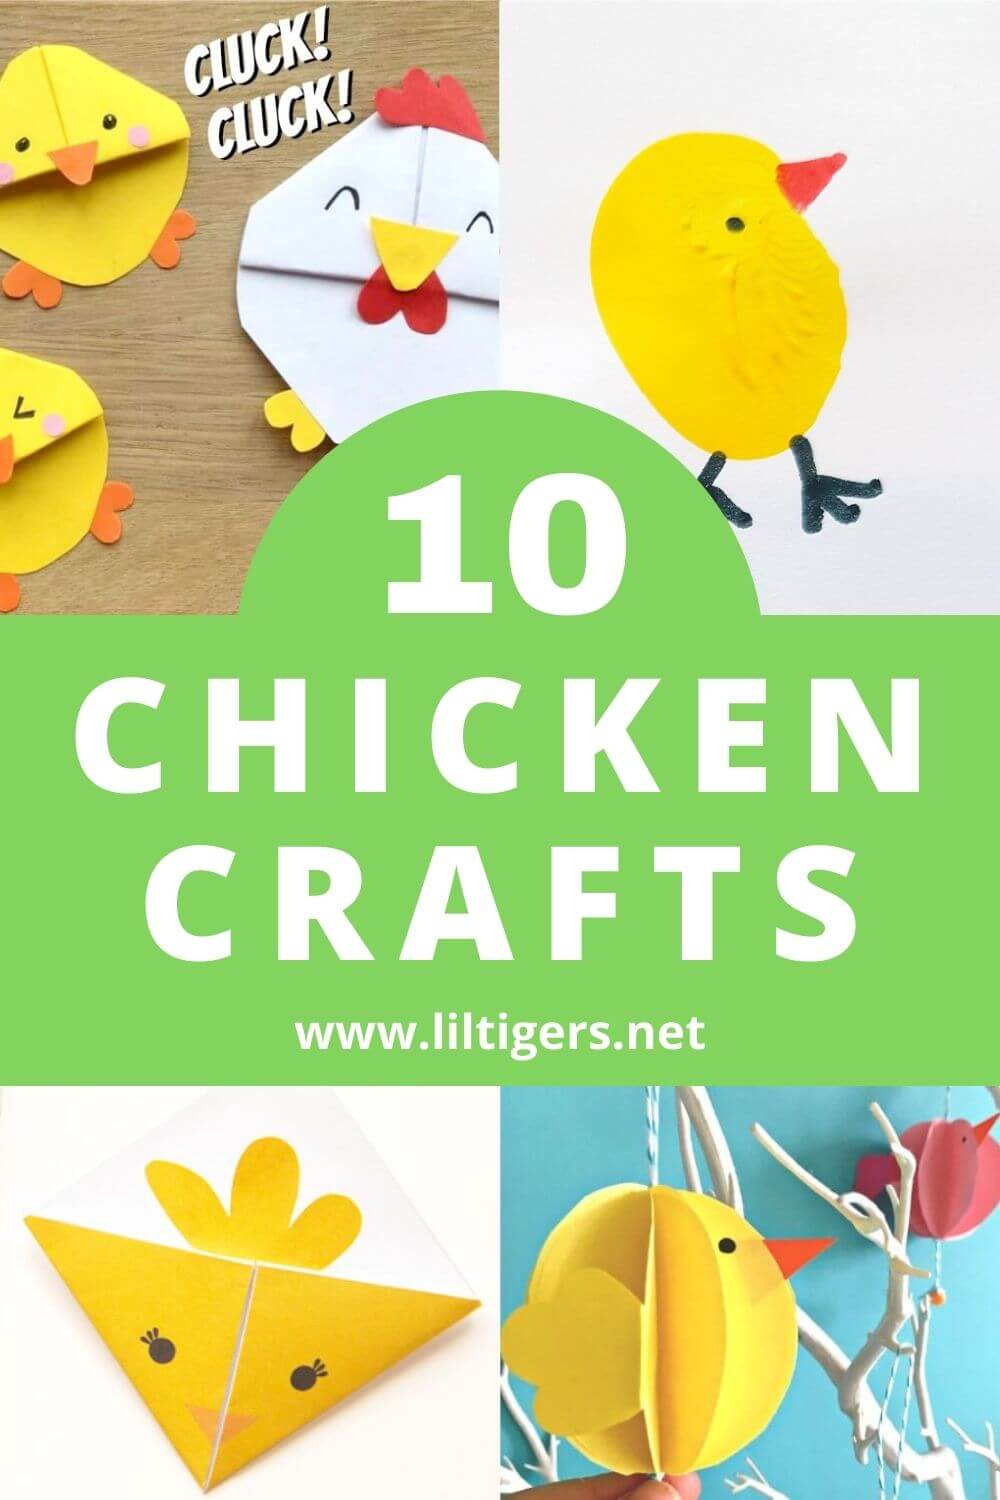 20 Adorable Chicken Crafts for Kids   Lil Tigers